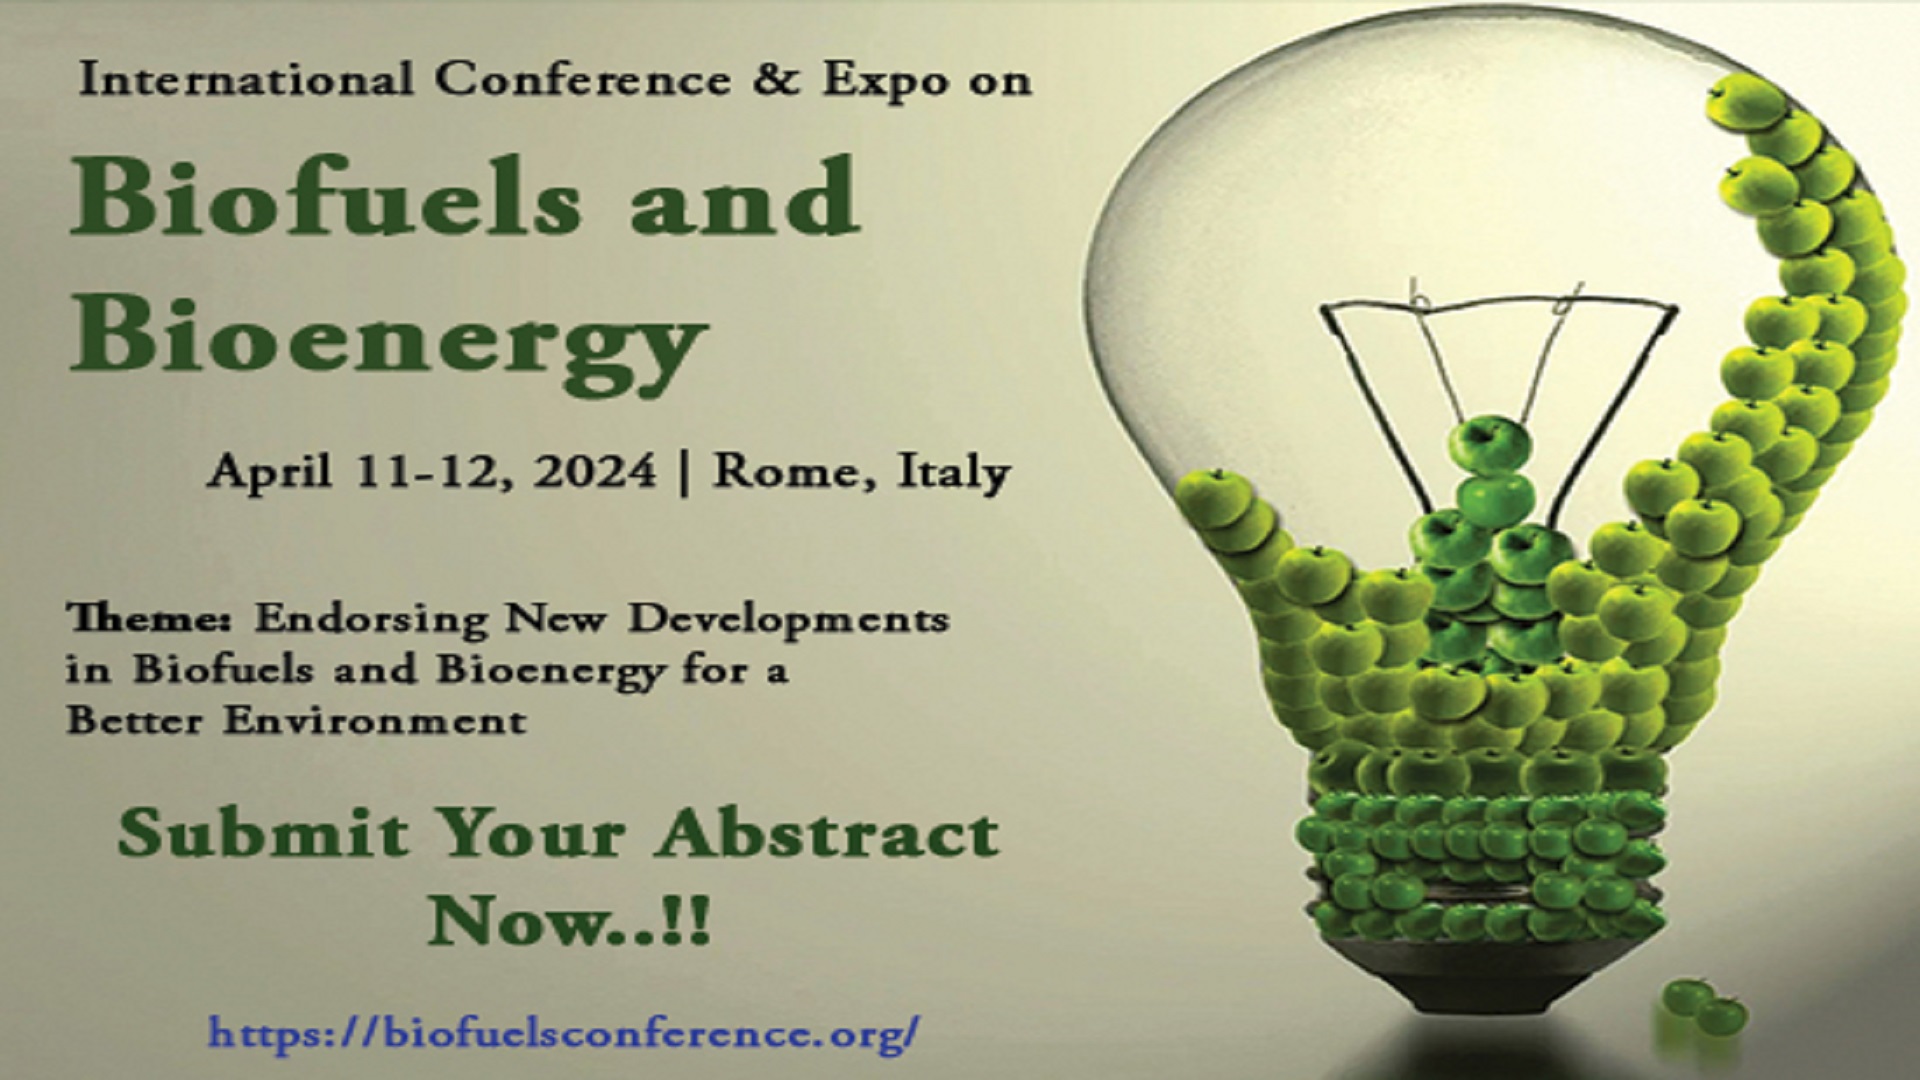 International Conference & Expo on Biofuels and Bioenergy organized by Carole Scott